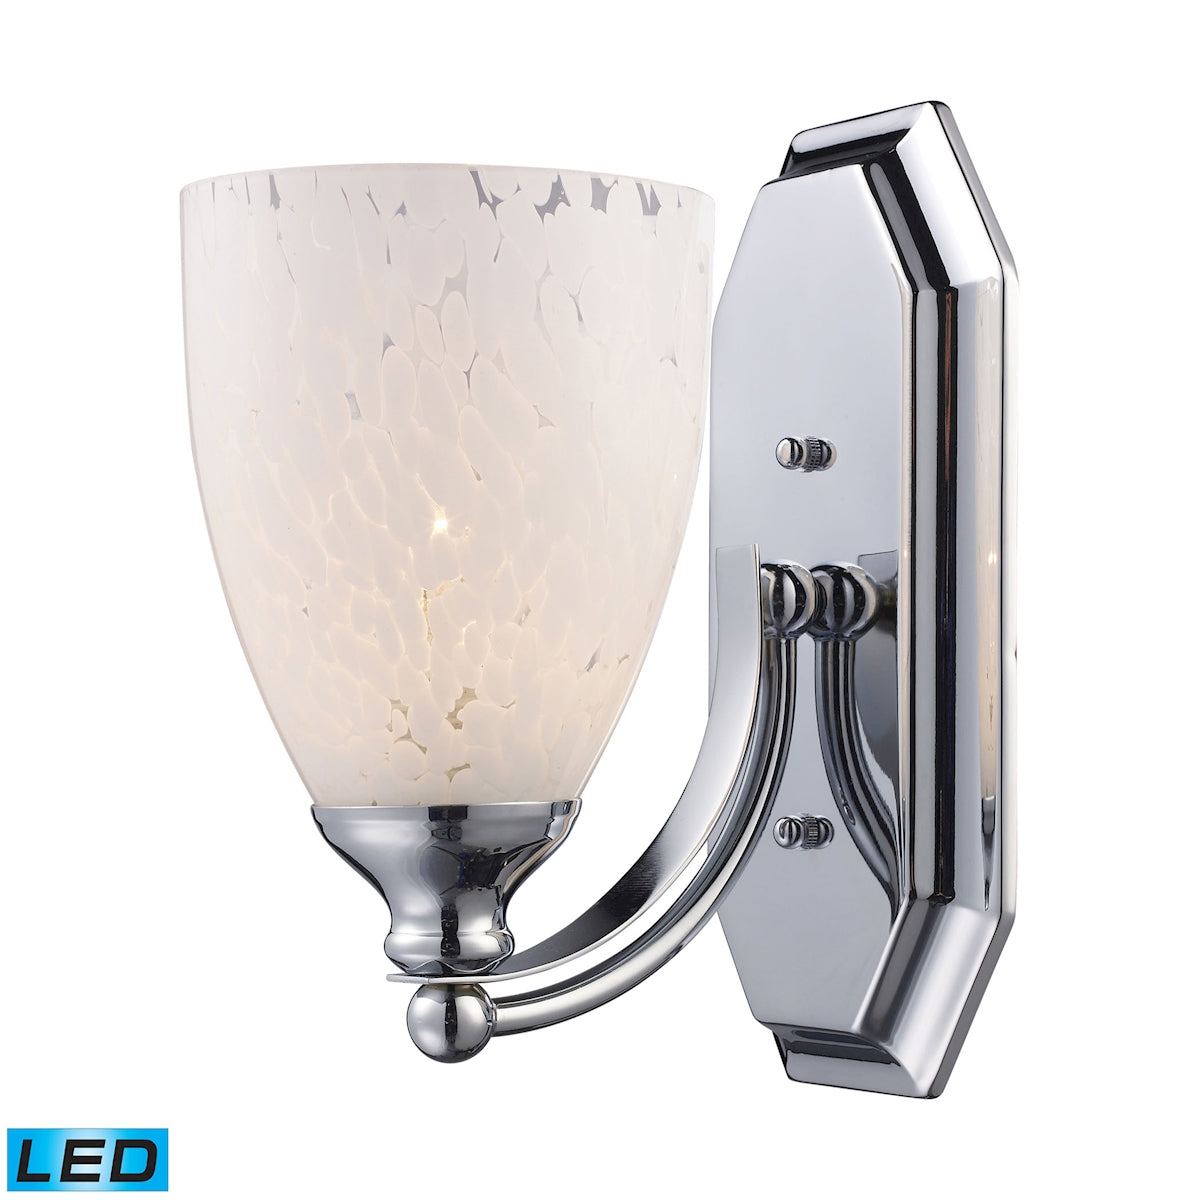 ELK Lighting 570-1C-SW-LED Mix and Match Vanity 1-Light Wall Lamp in Chrome with Snow White Glass - Includes LED Bulb